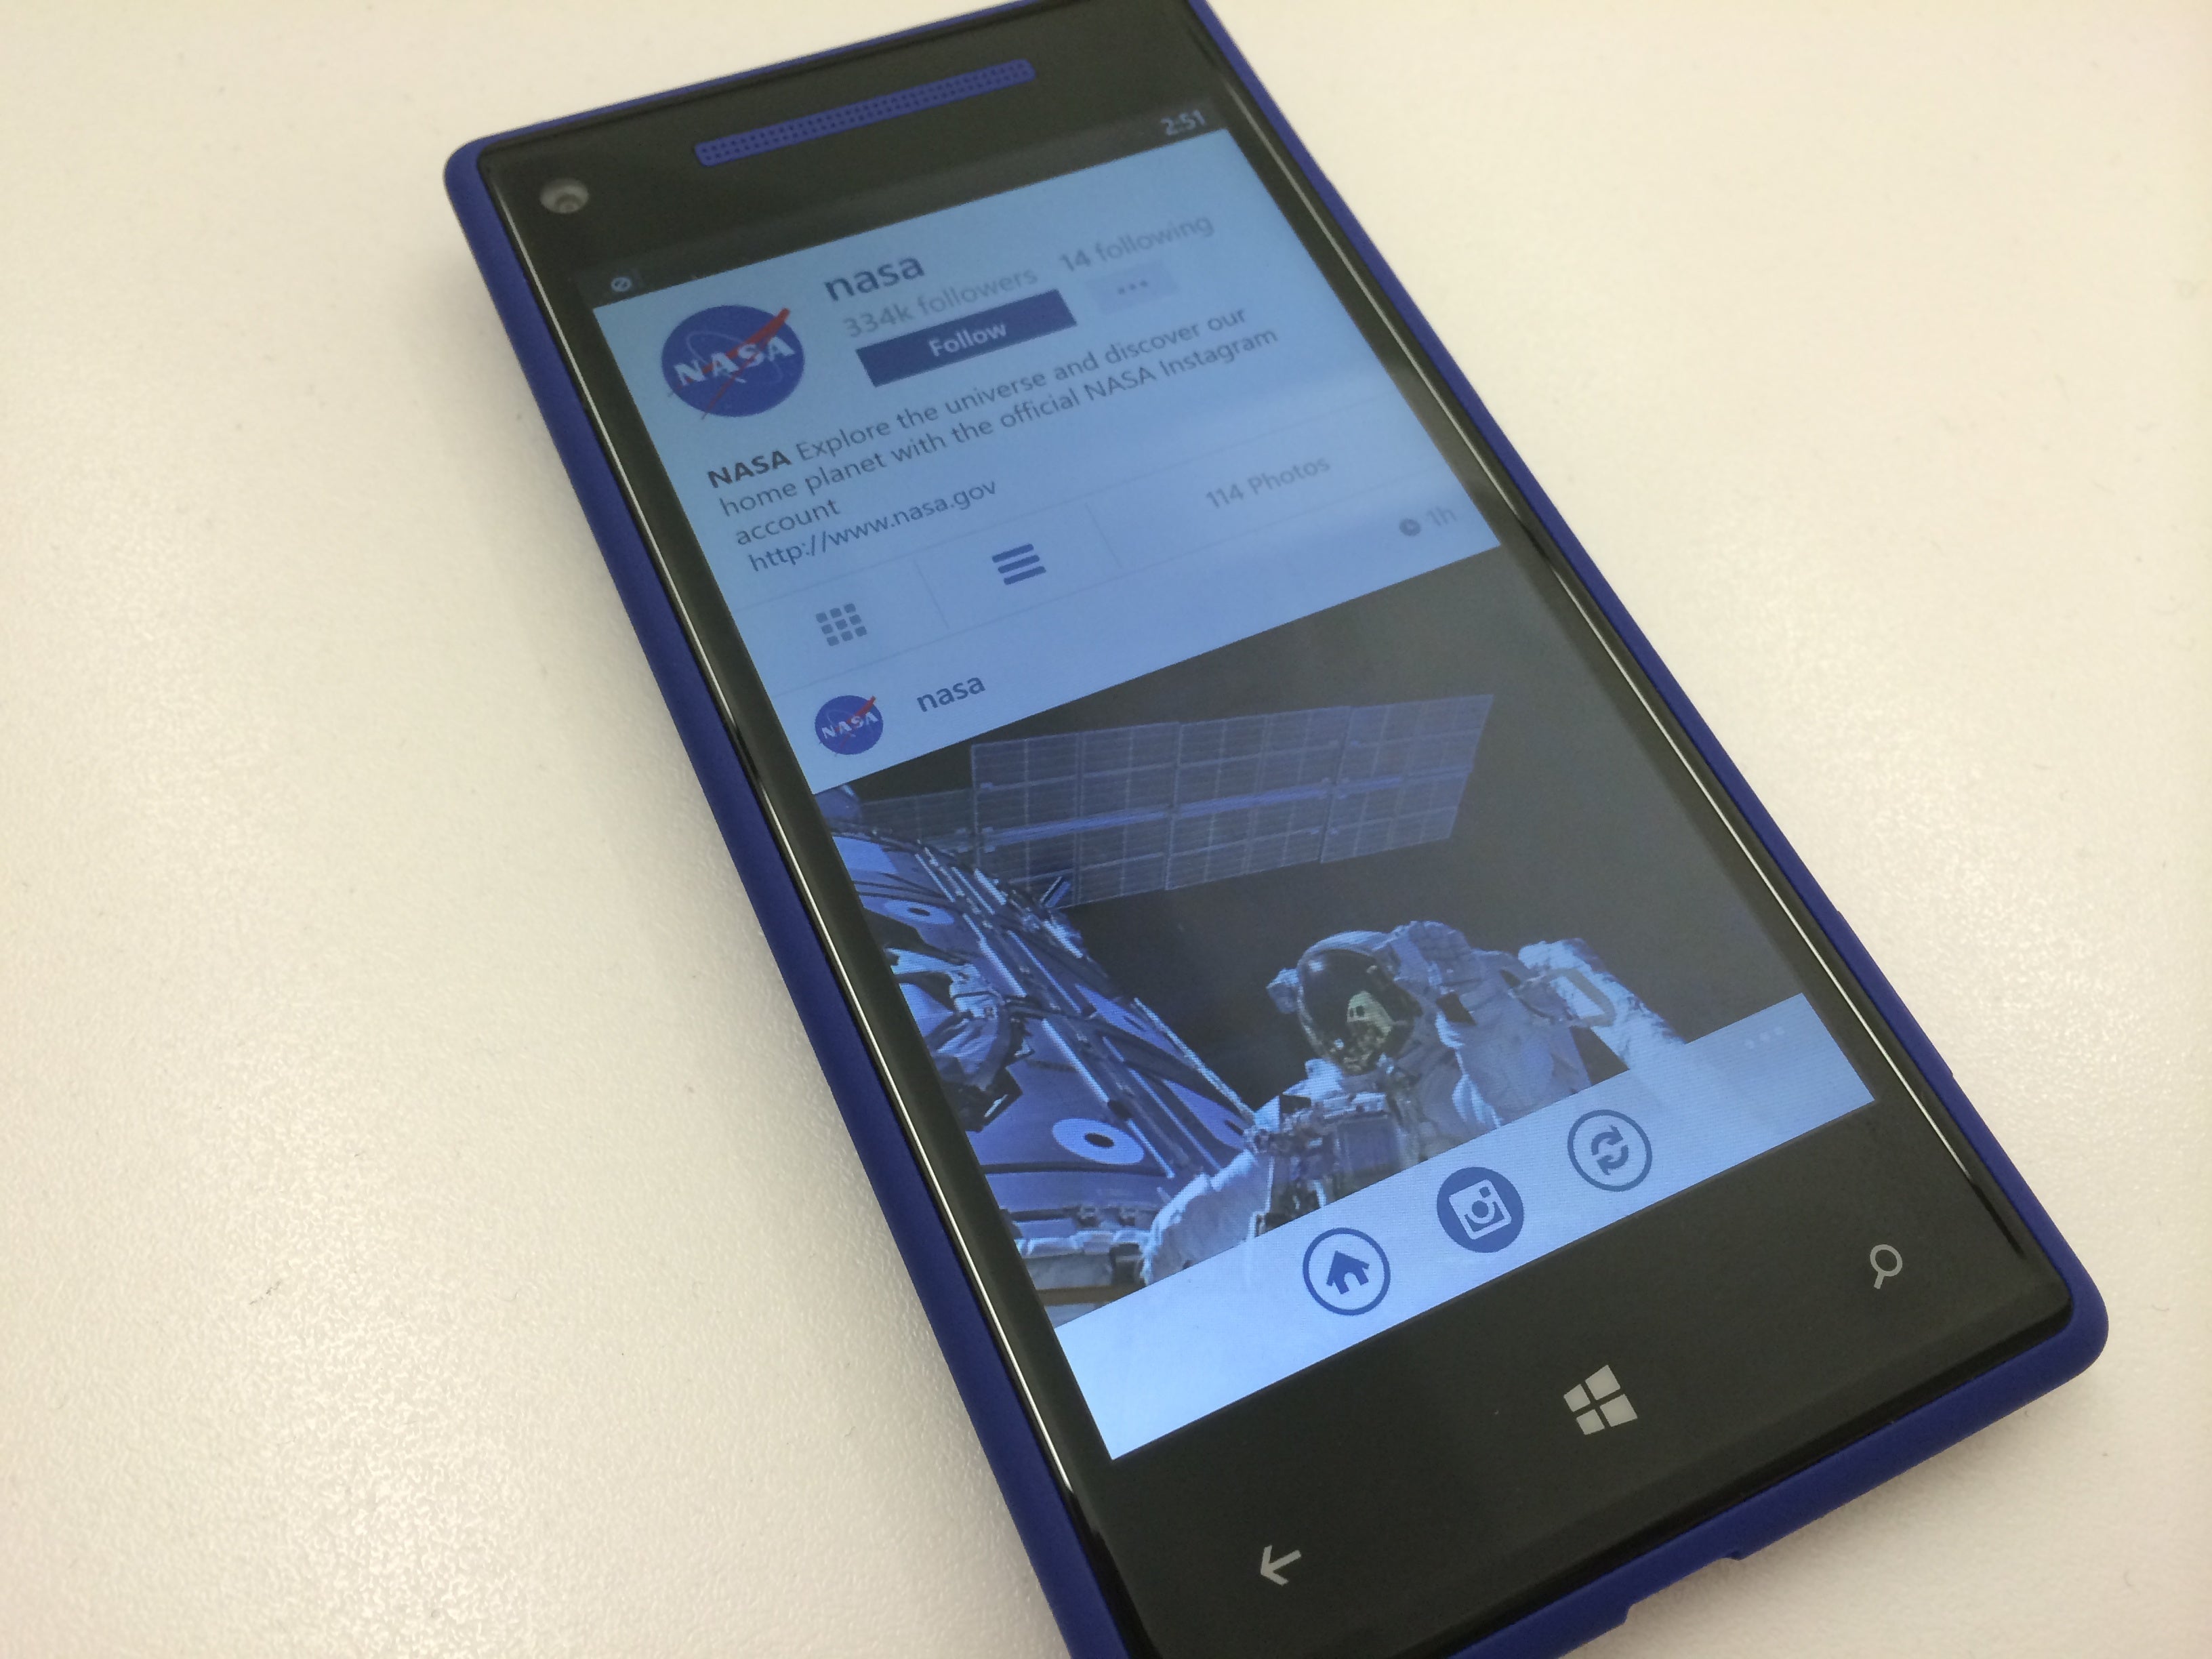 Instagram on windows phone all you need to know